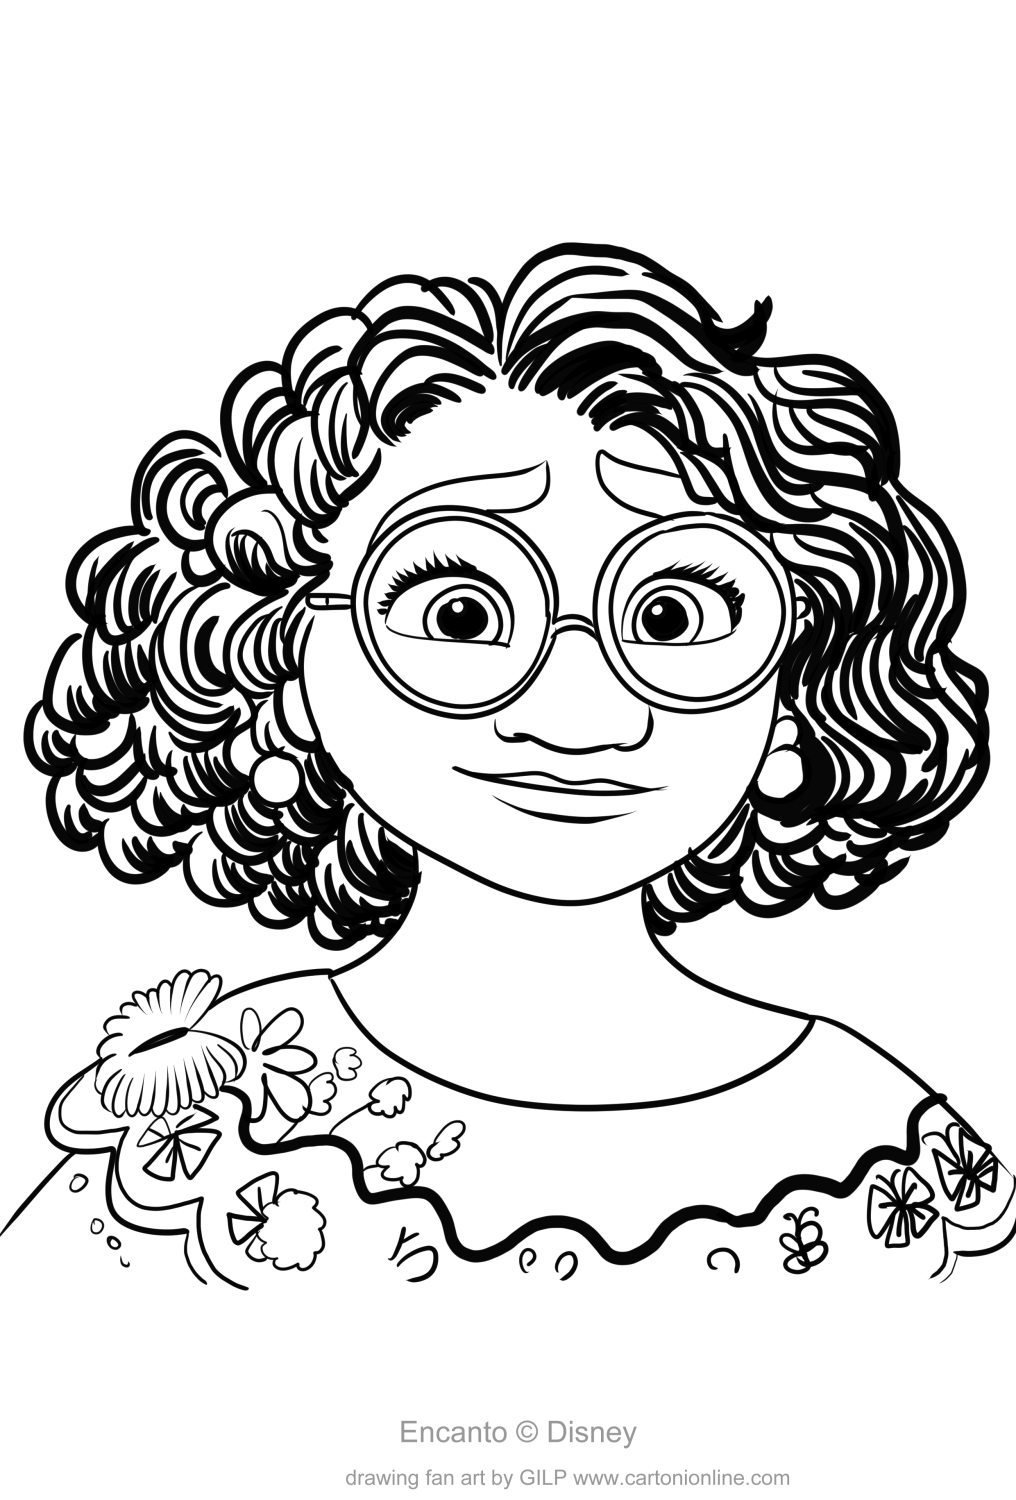 Mirabel Madrigal from Encanto coloring page to print and coloring